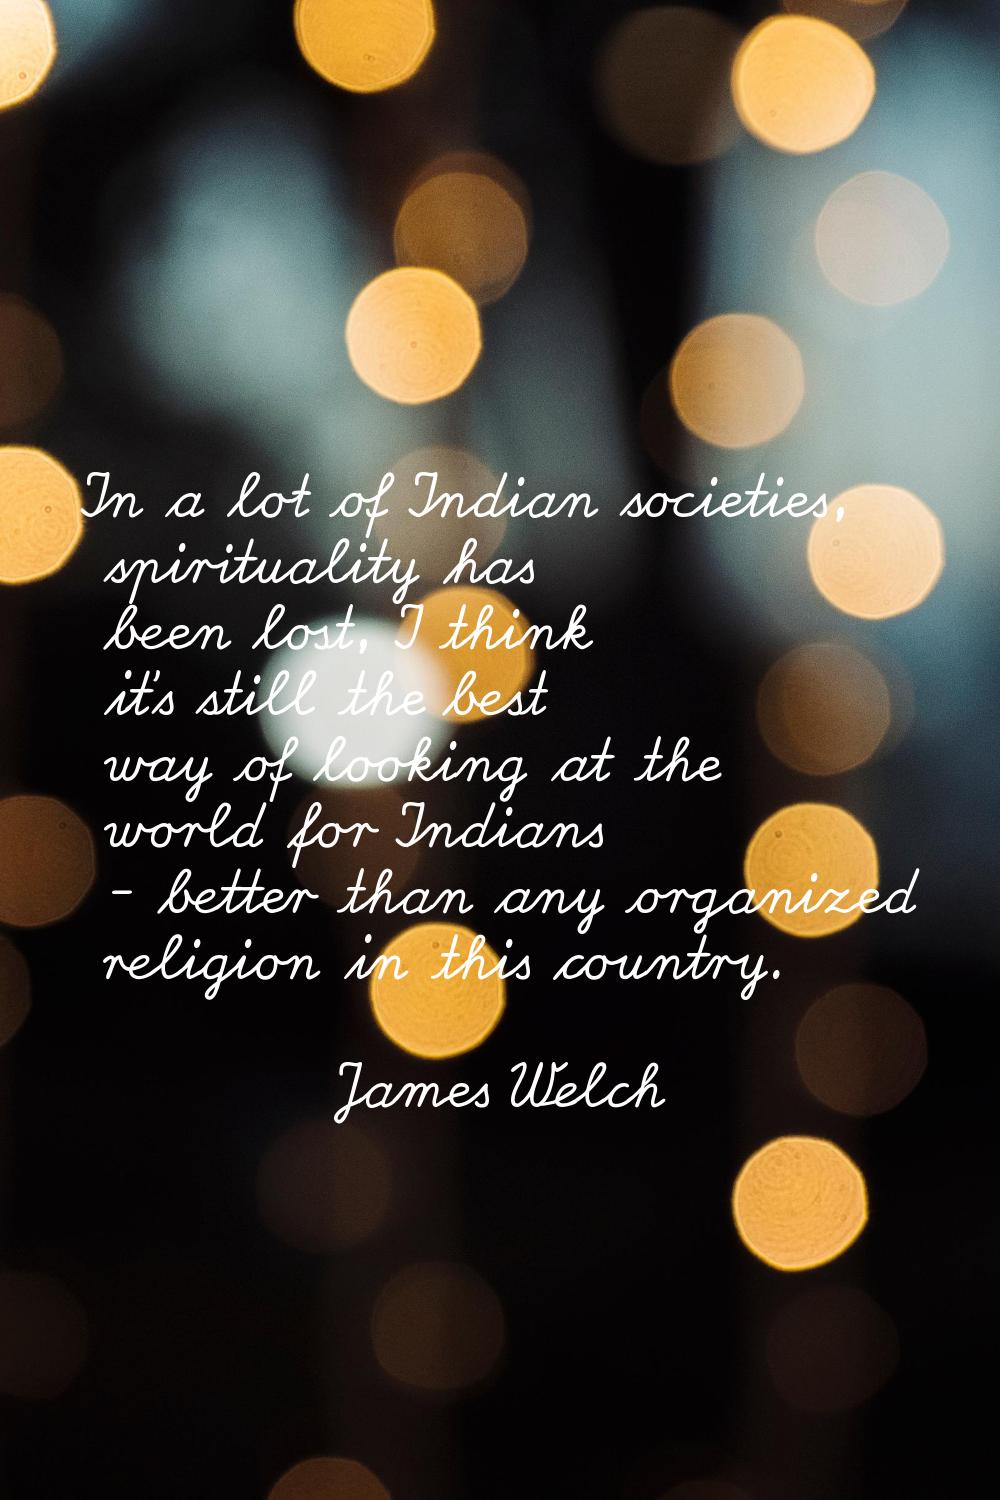 In a lot of Indian societies, spirituality has been lost, I think it's still the best way of lookin